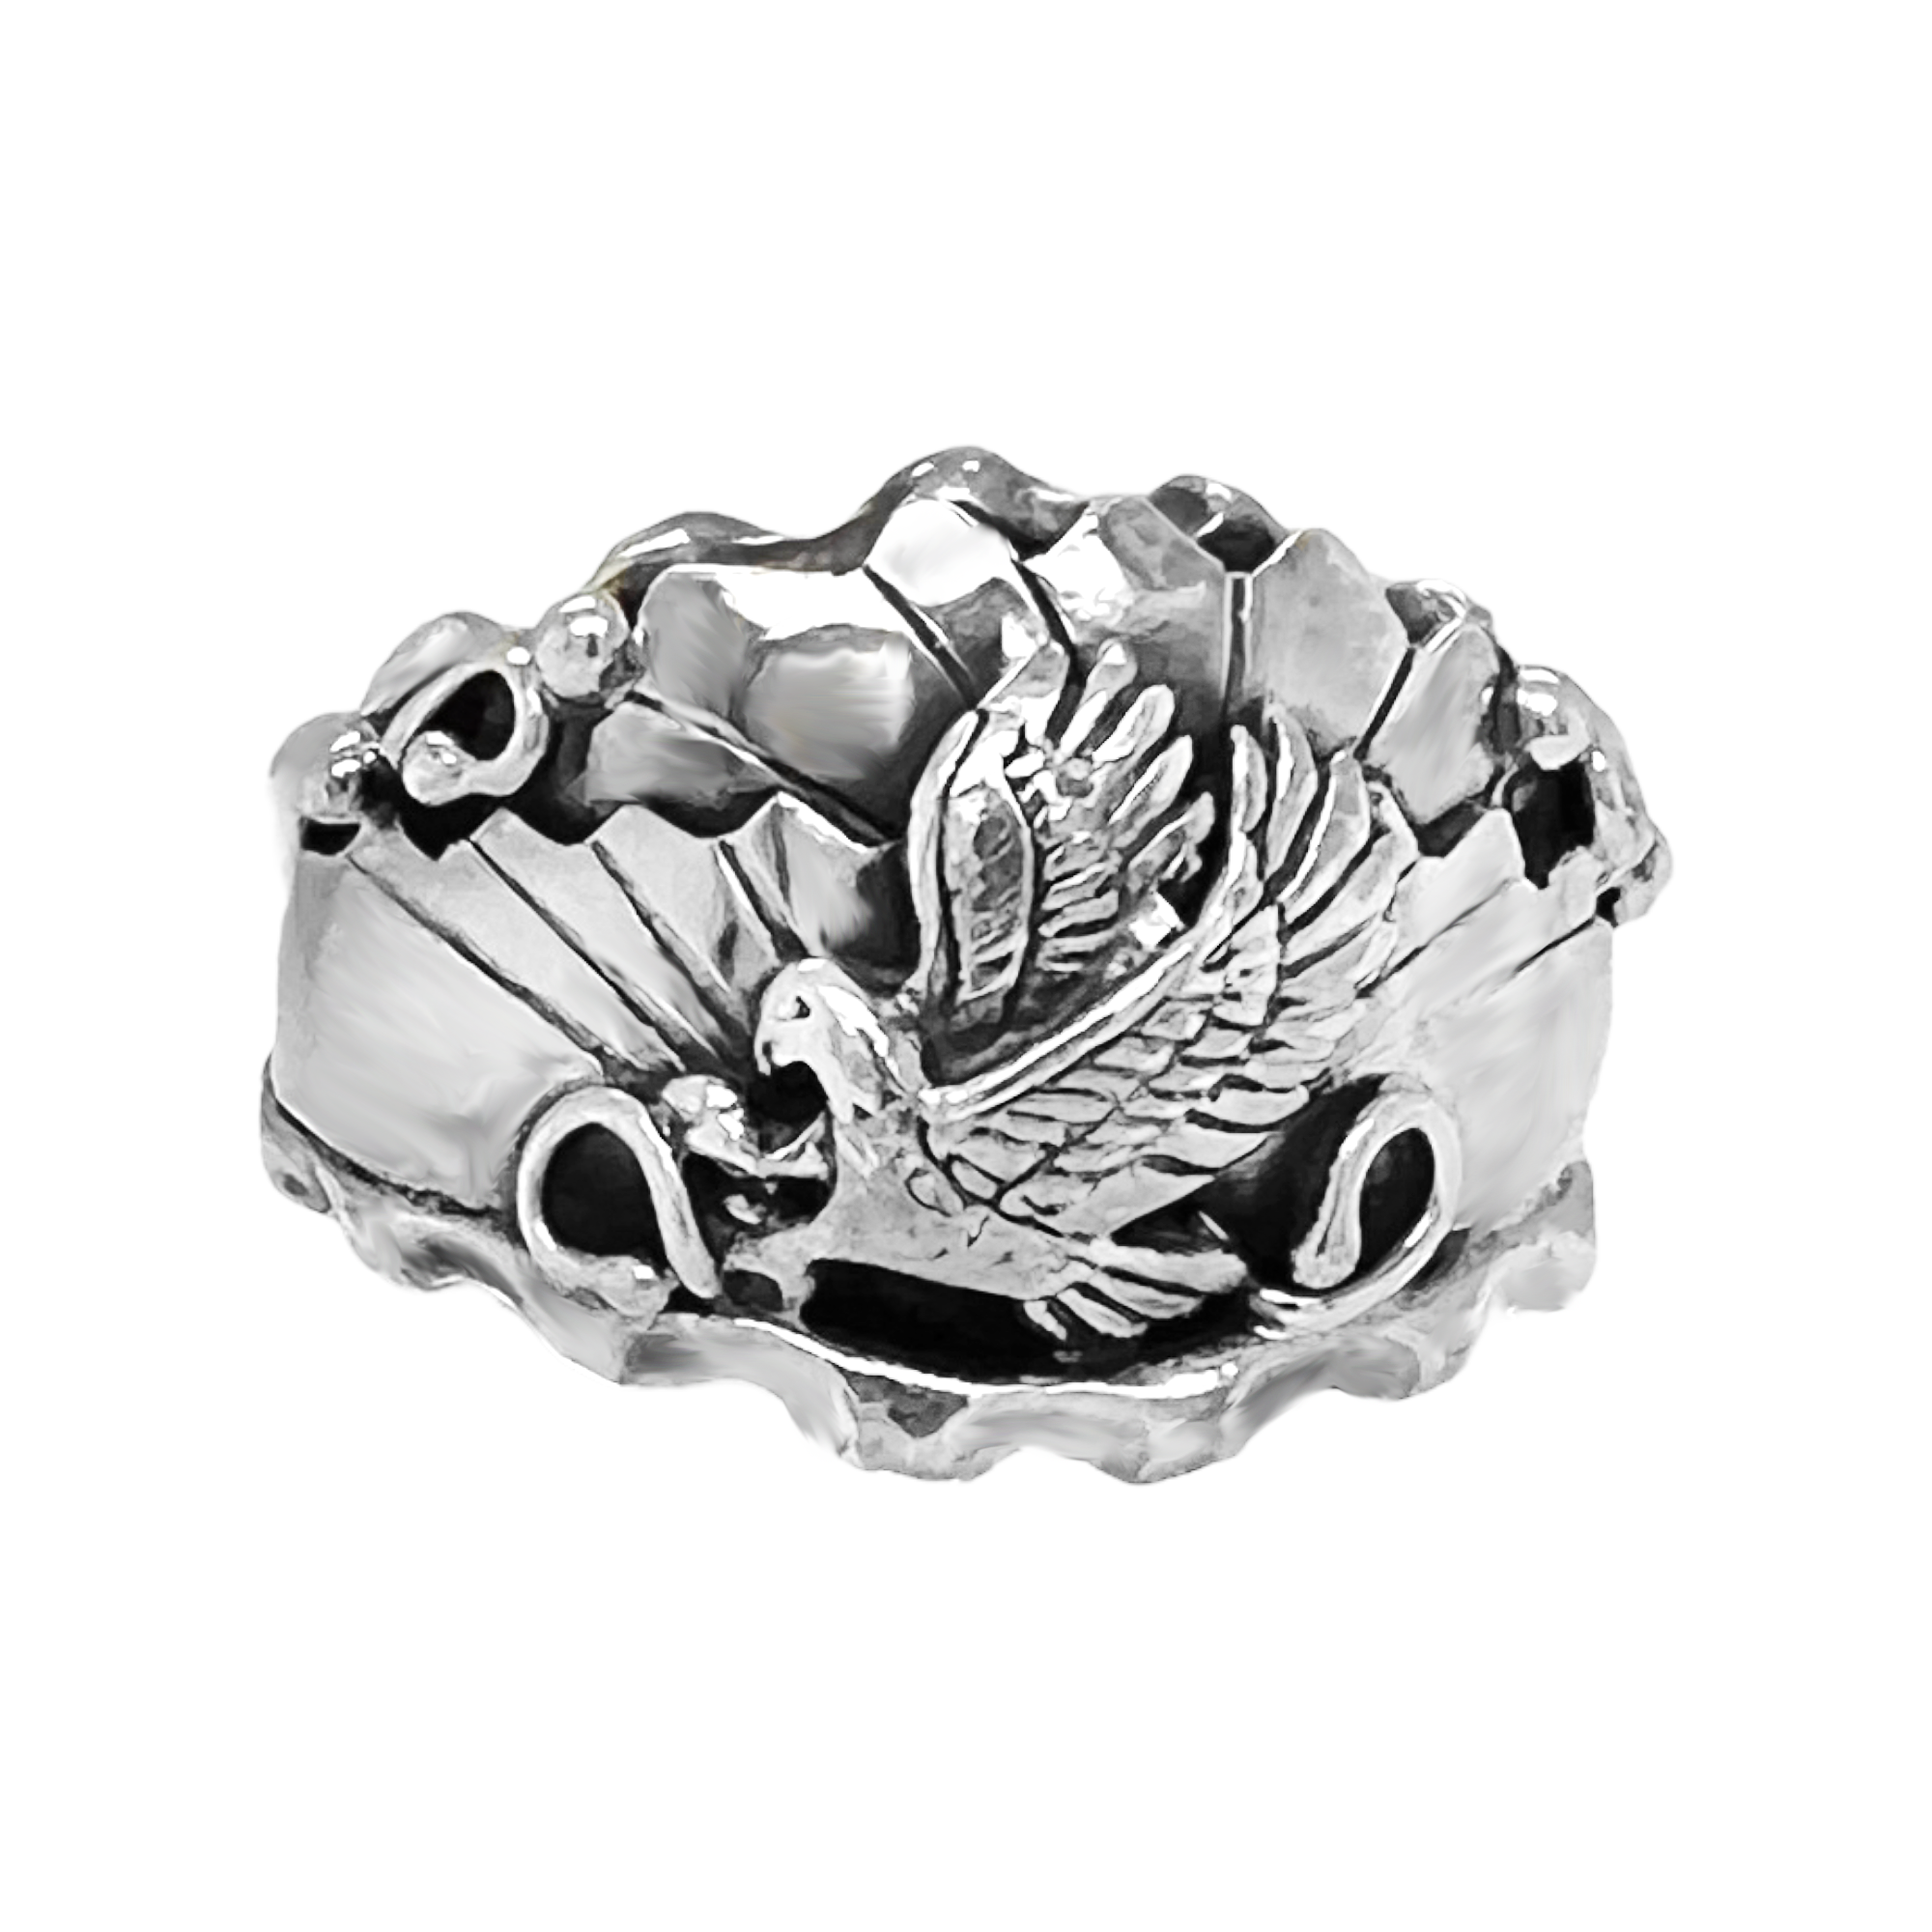 Genuine Sterling Silver Eagle Ring, Size 14.5, Sterling Silver, Authentic Navajo Native American USA Handmade, Nickel Free, Southwest Jewelry for Men